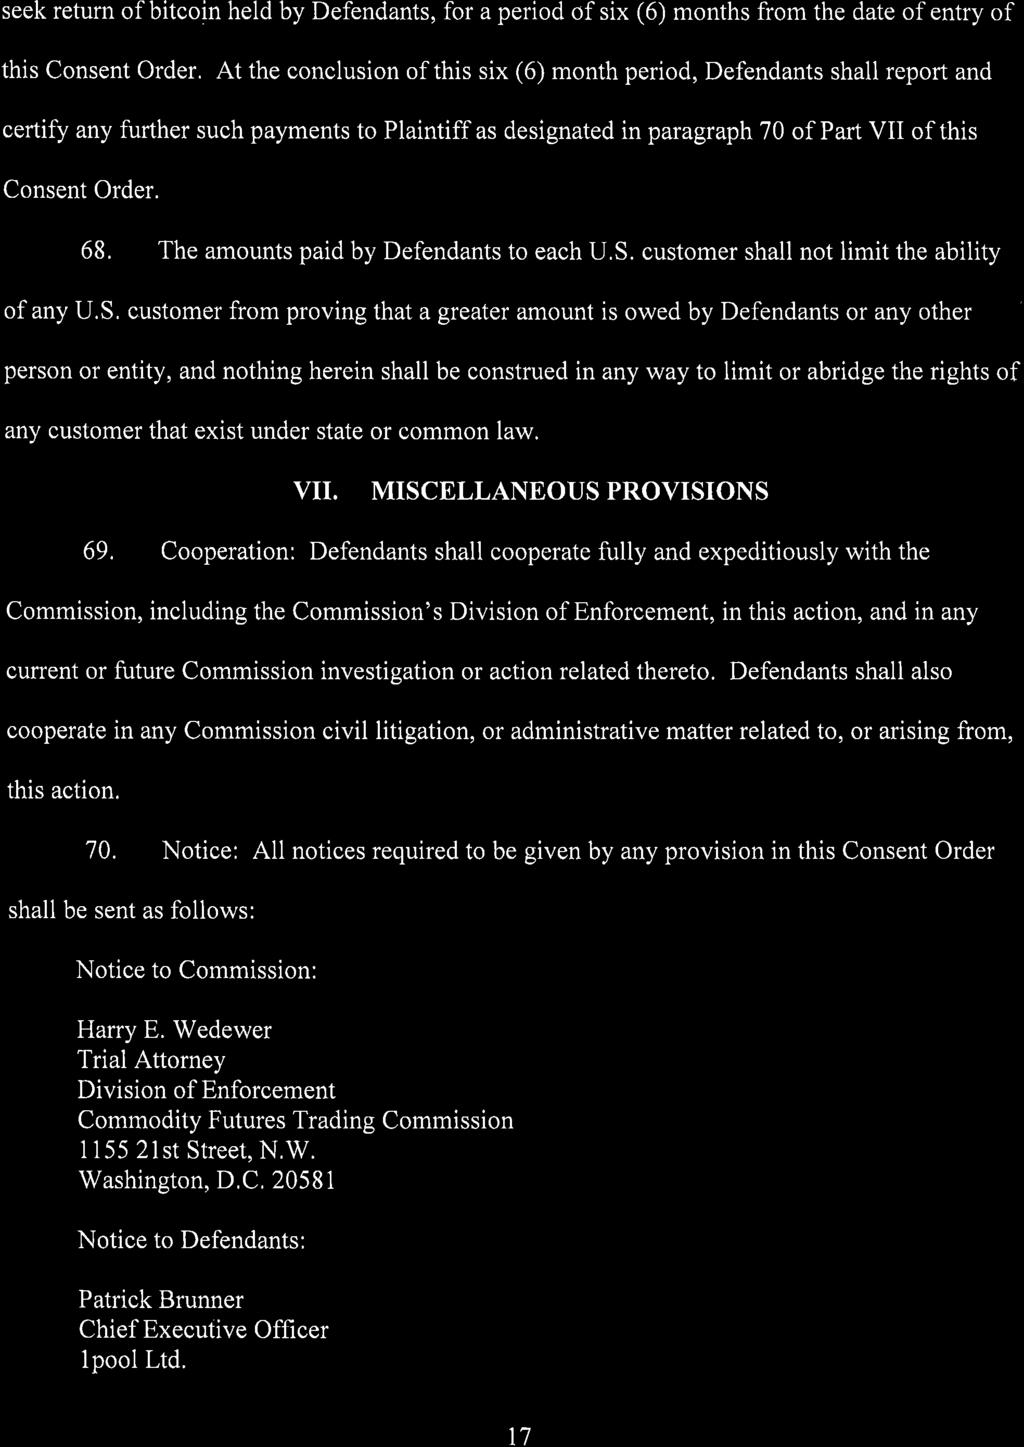 Case 1:18-cv-02243-TNM Document 14 Filed 03/04/19 Page 17 of 20 seek return of bitcoin held by Defendants, for a period of six ( 6 months from the date of entry of this Consent Order.